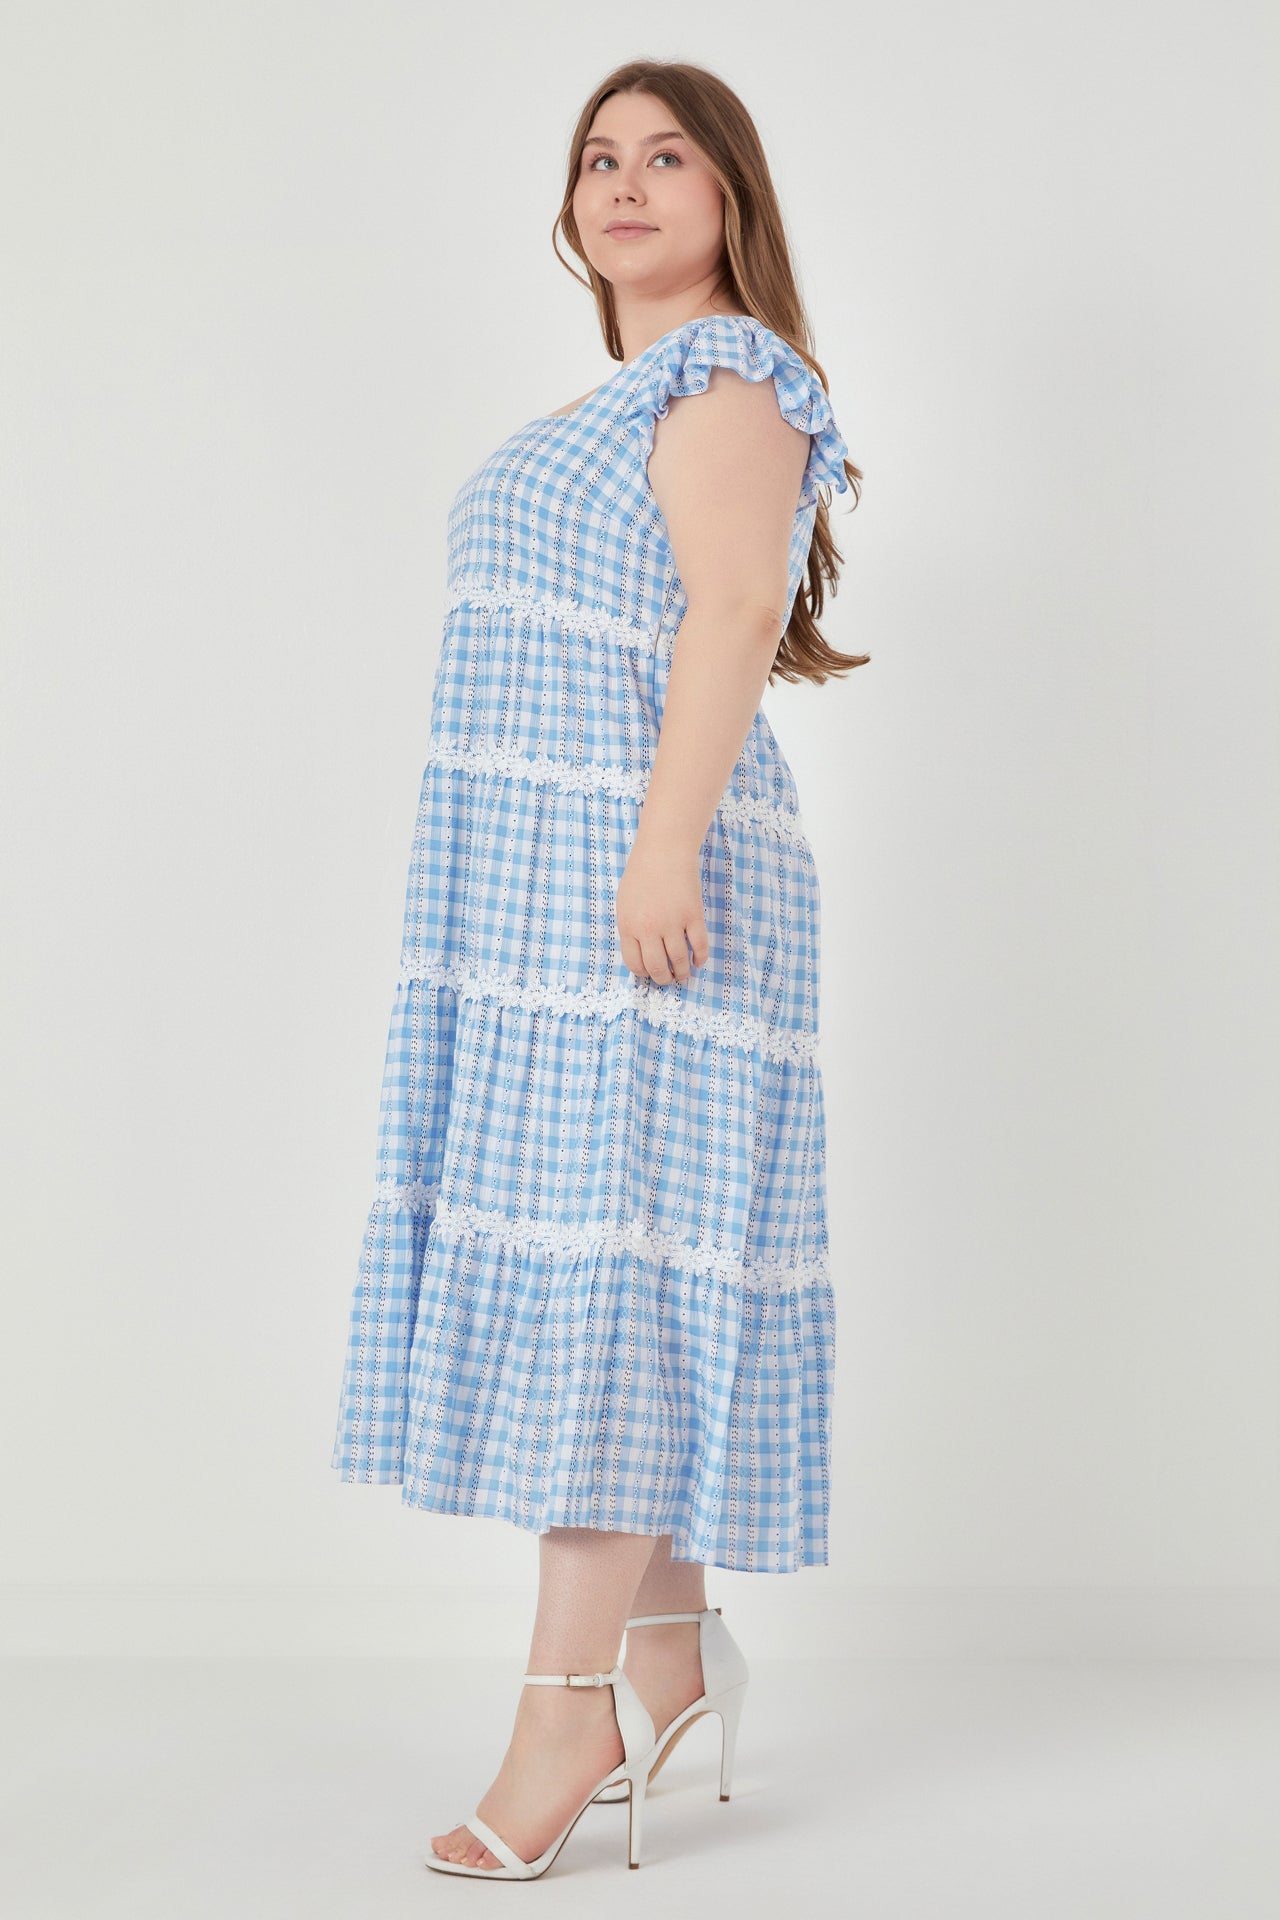 ENGLISH FACTORY - Floral Lace Gingham Printed Midi Dress - DRESSES available at Objectrare